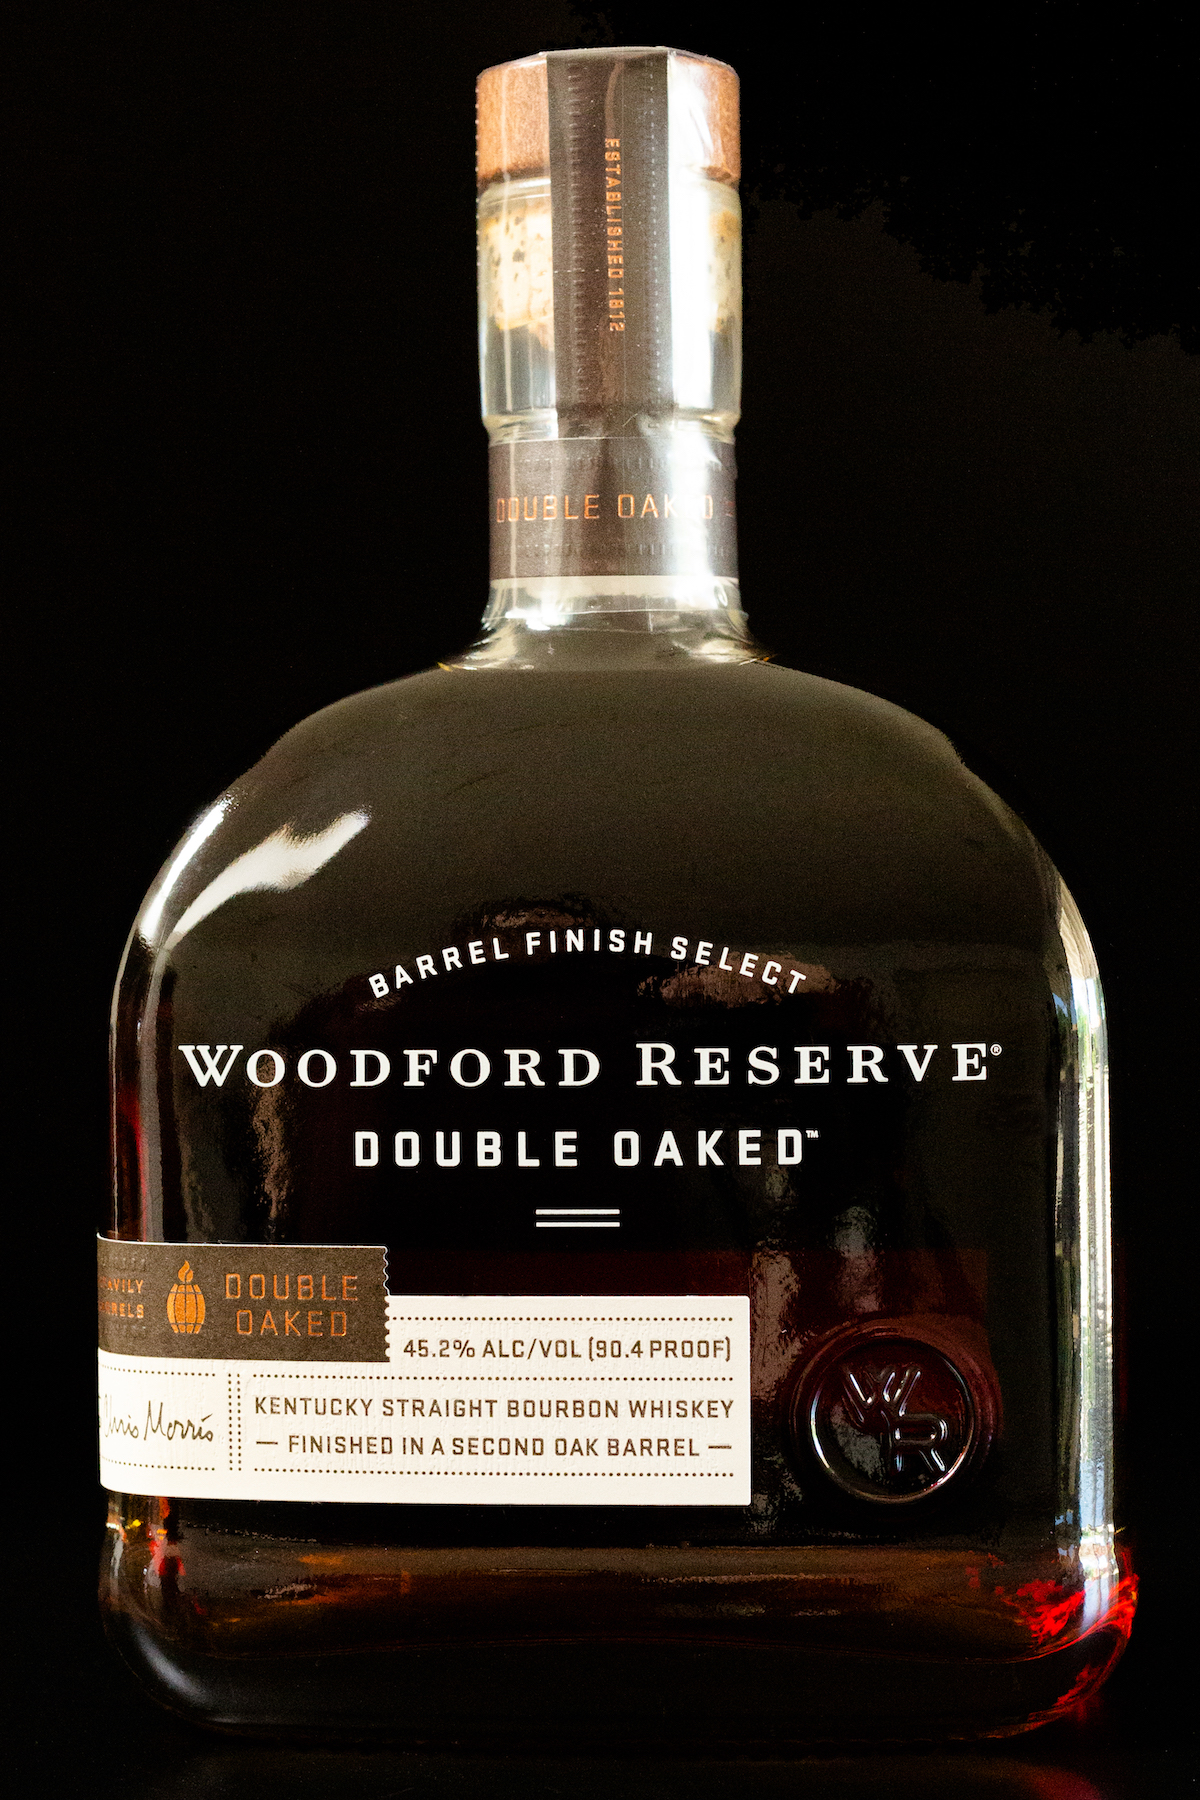 A bottle of Woodford Reserve Double Baked bourbon on a black background.